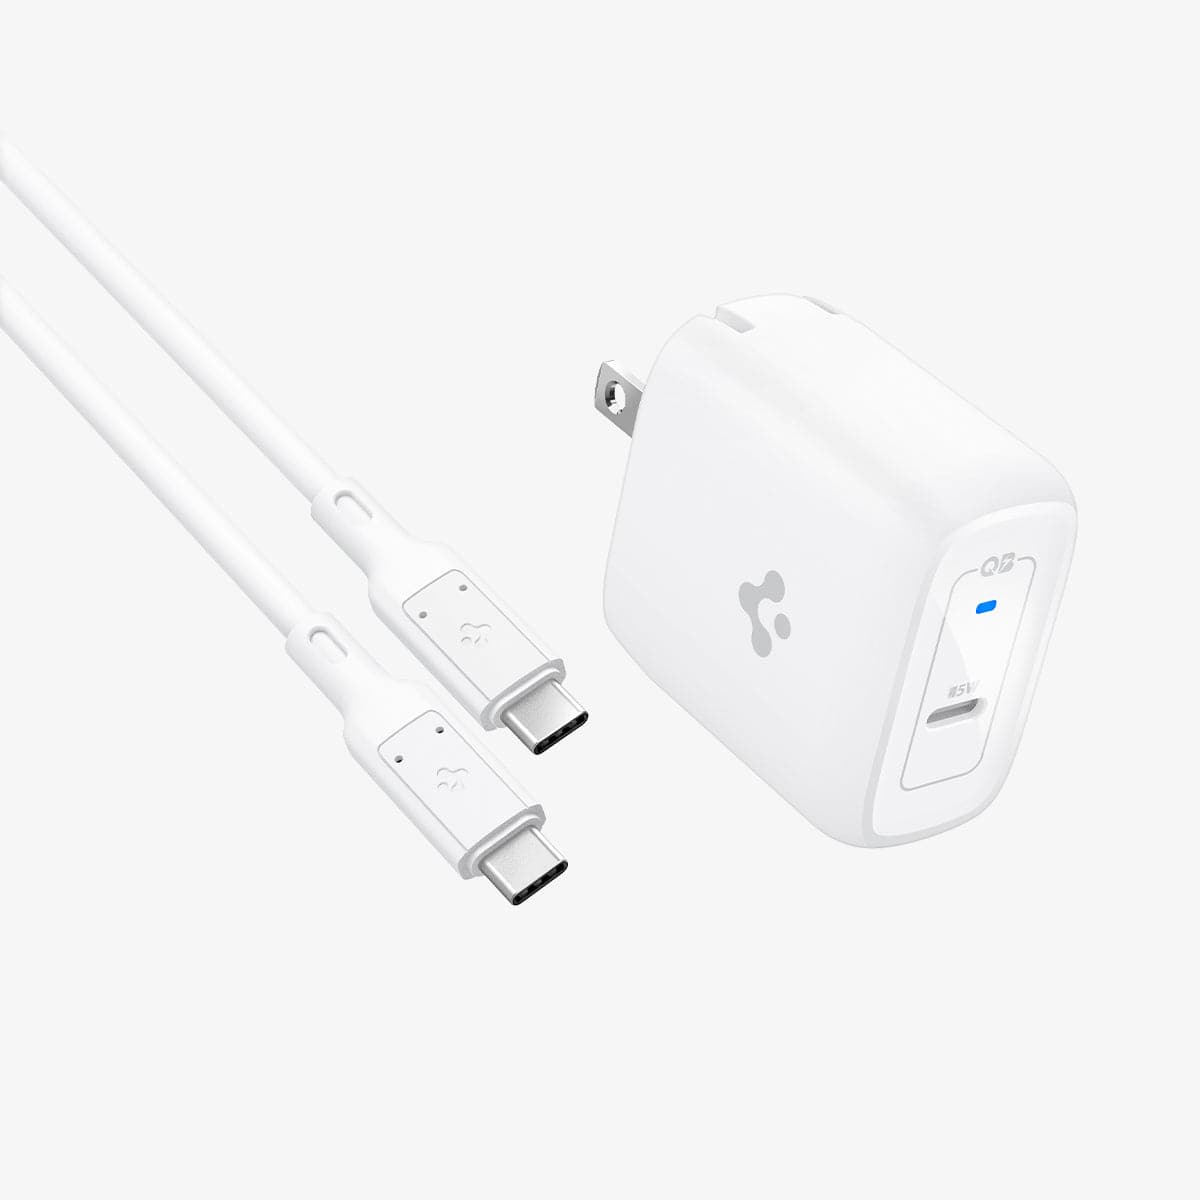 ACH02587 - ArcStation™ Pro 45W Wall Charger PE2015 in white showing the front and side with charging cable next to it